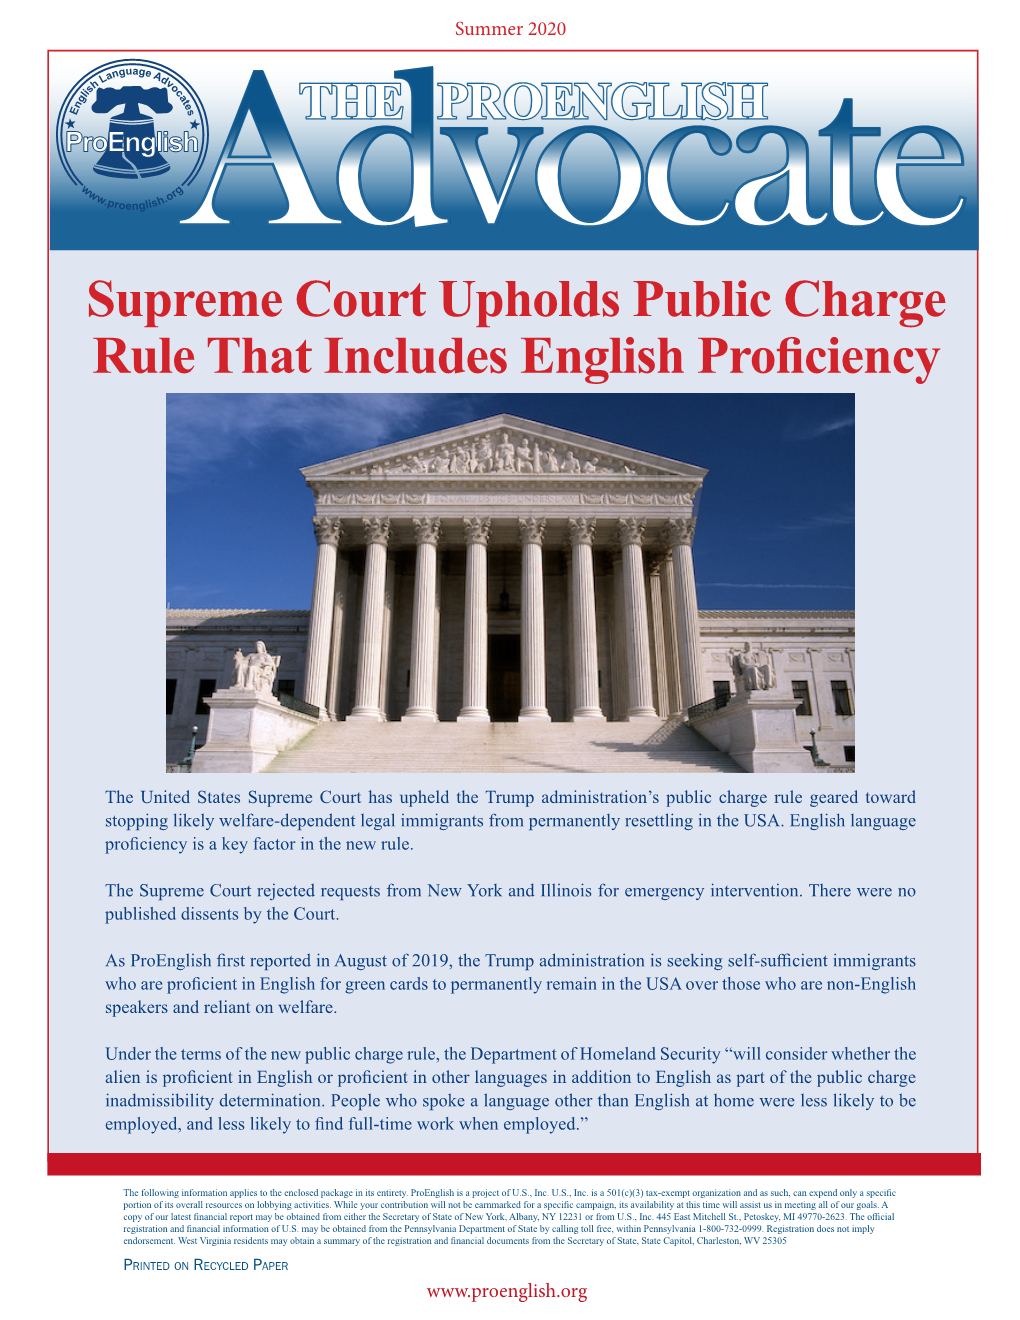 Supreme Court Upholds Public Charge Rule That Includes English Proficiency